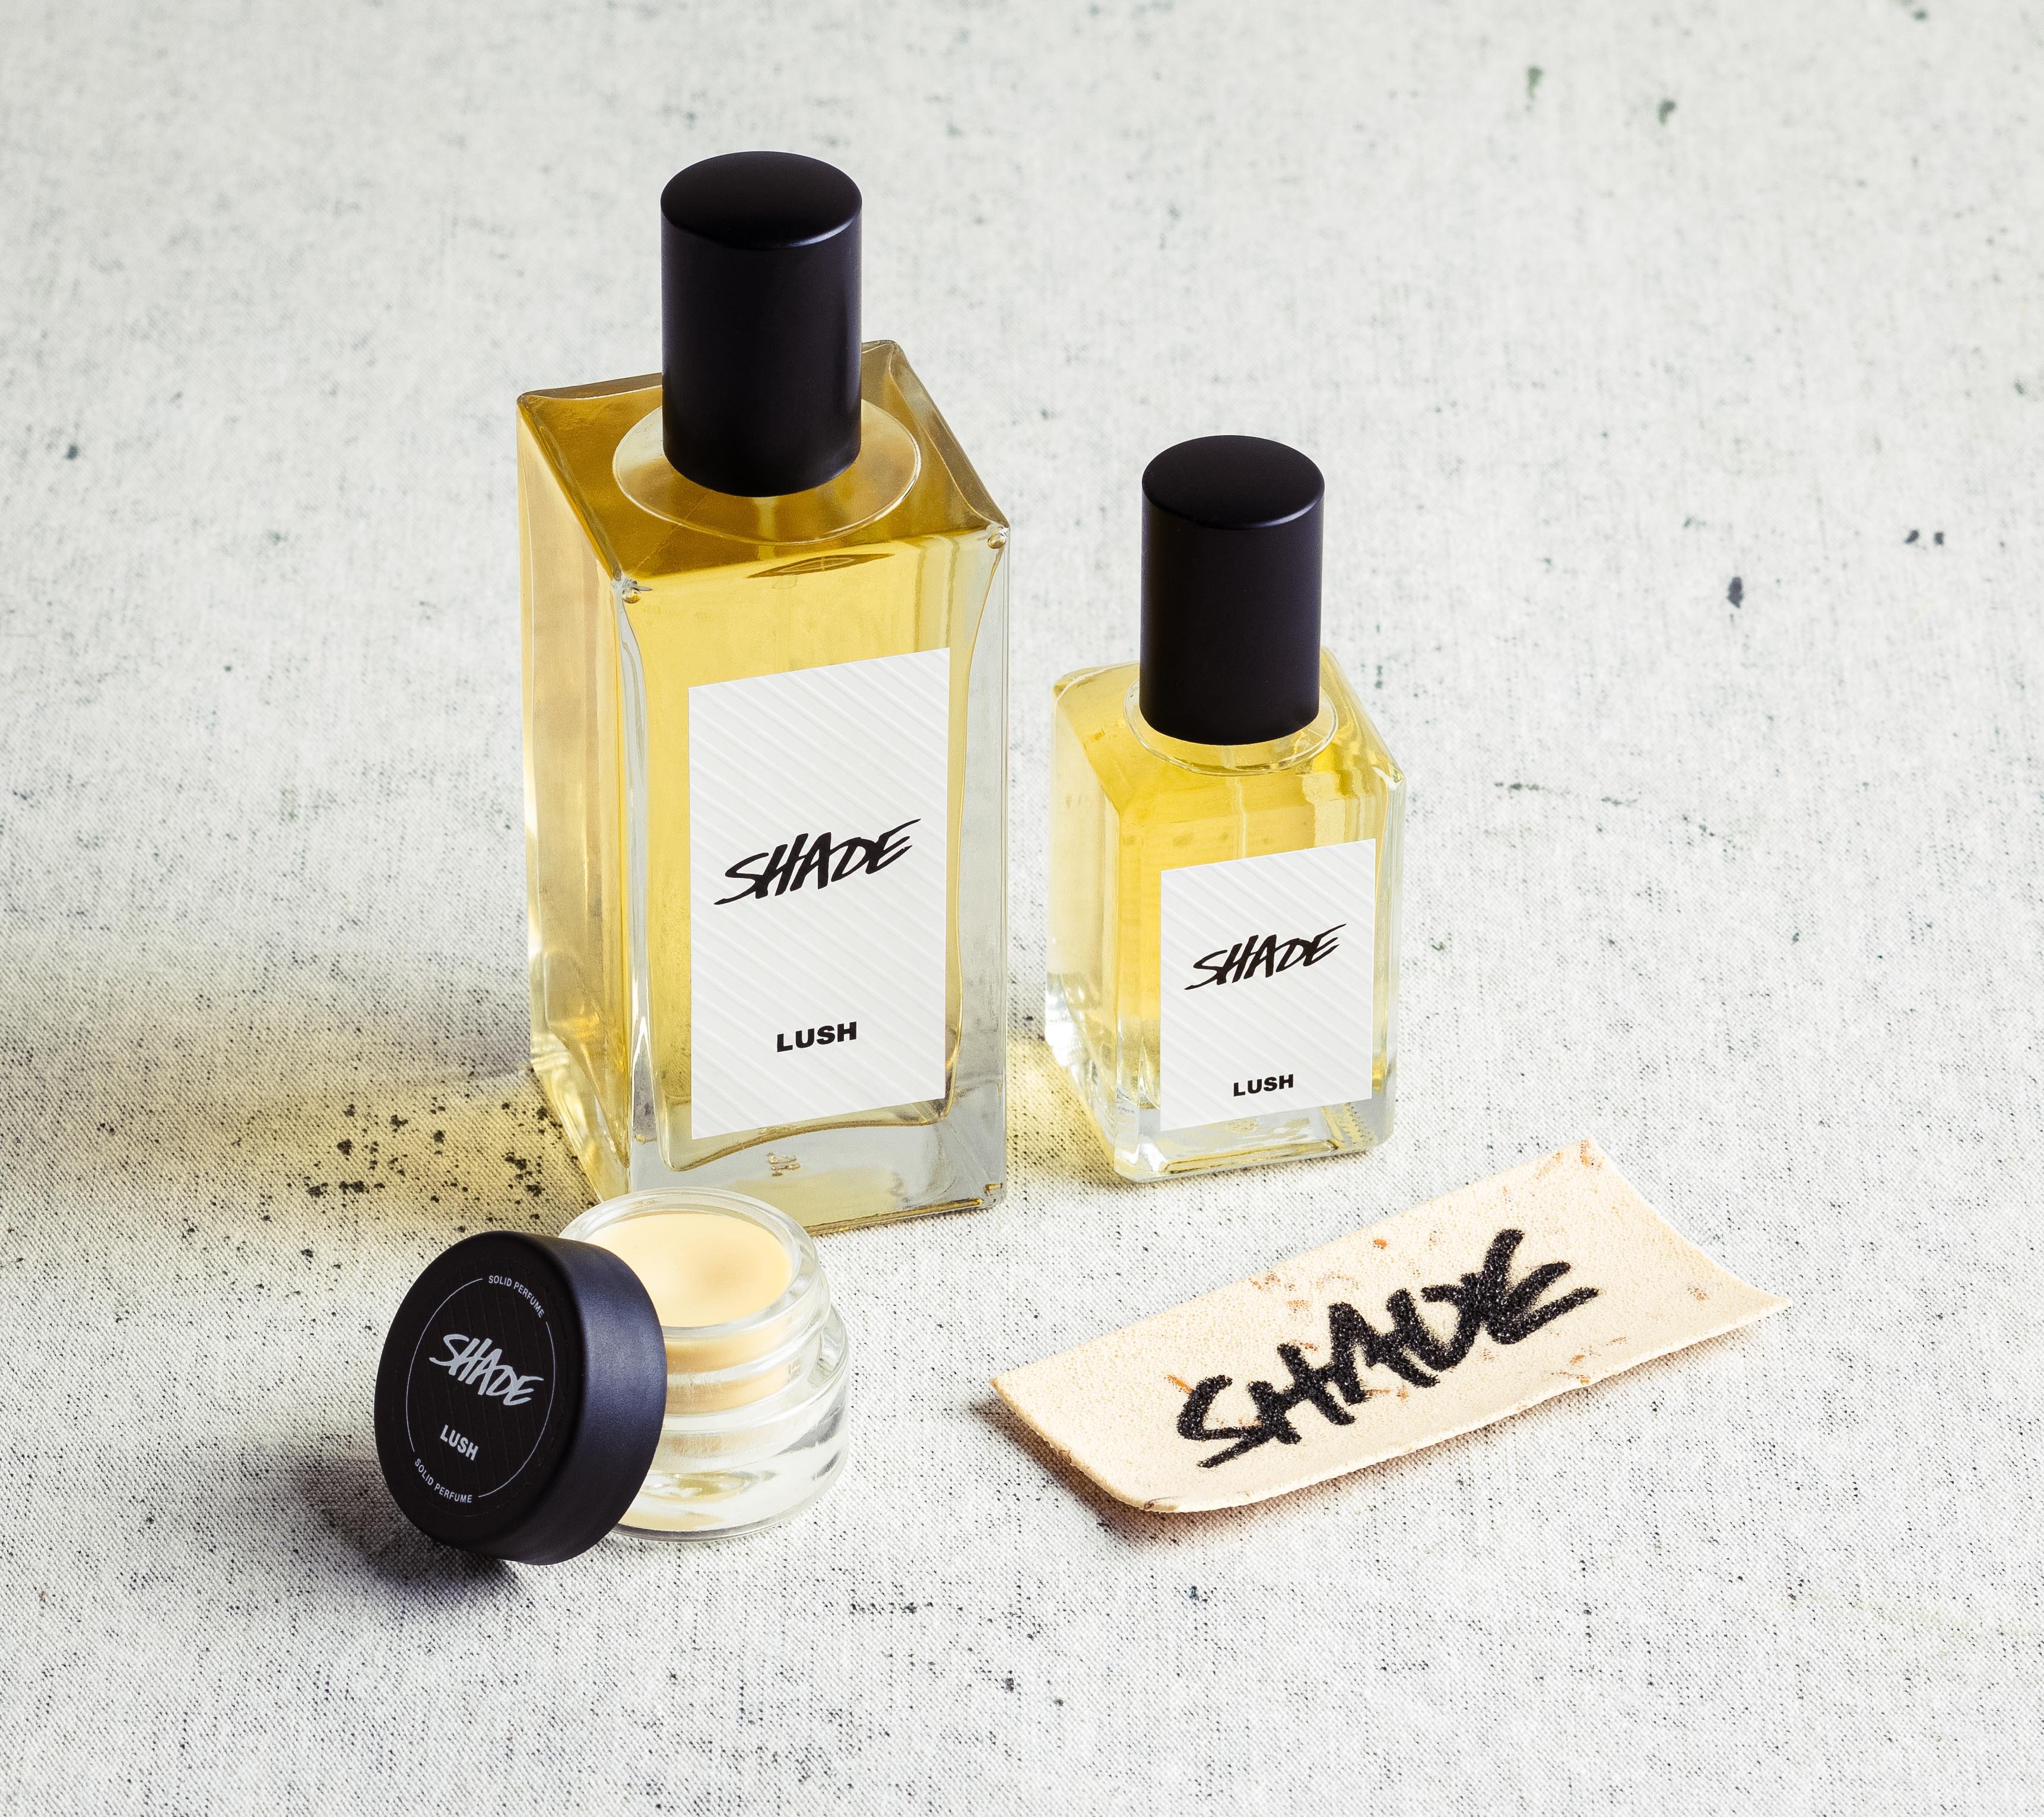 The whole Shade fragrance collection is displayed on a white surface, flecked with grey.